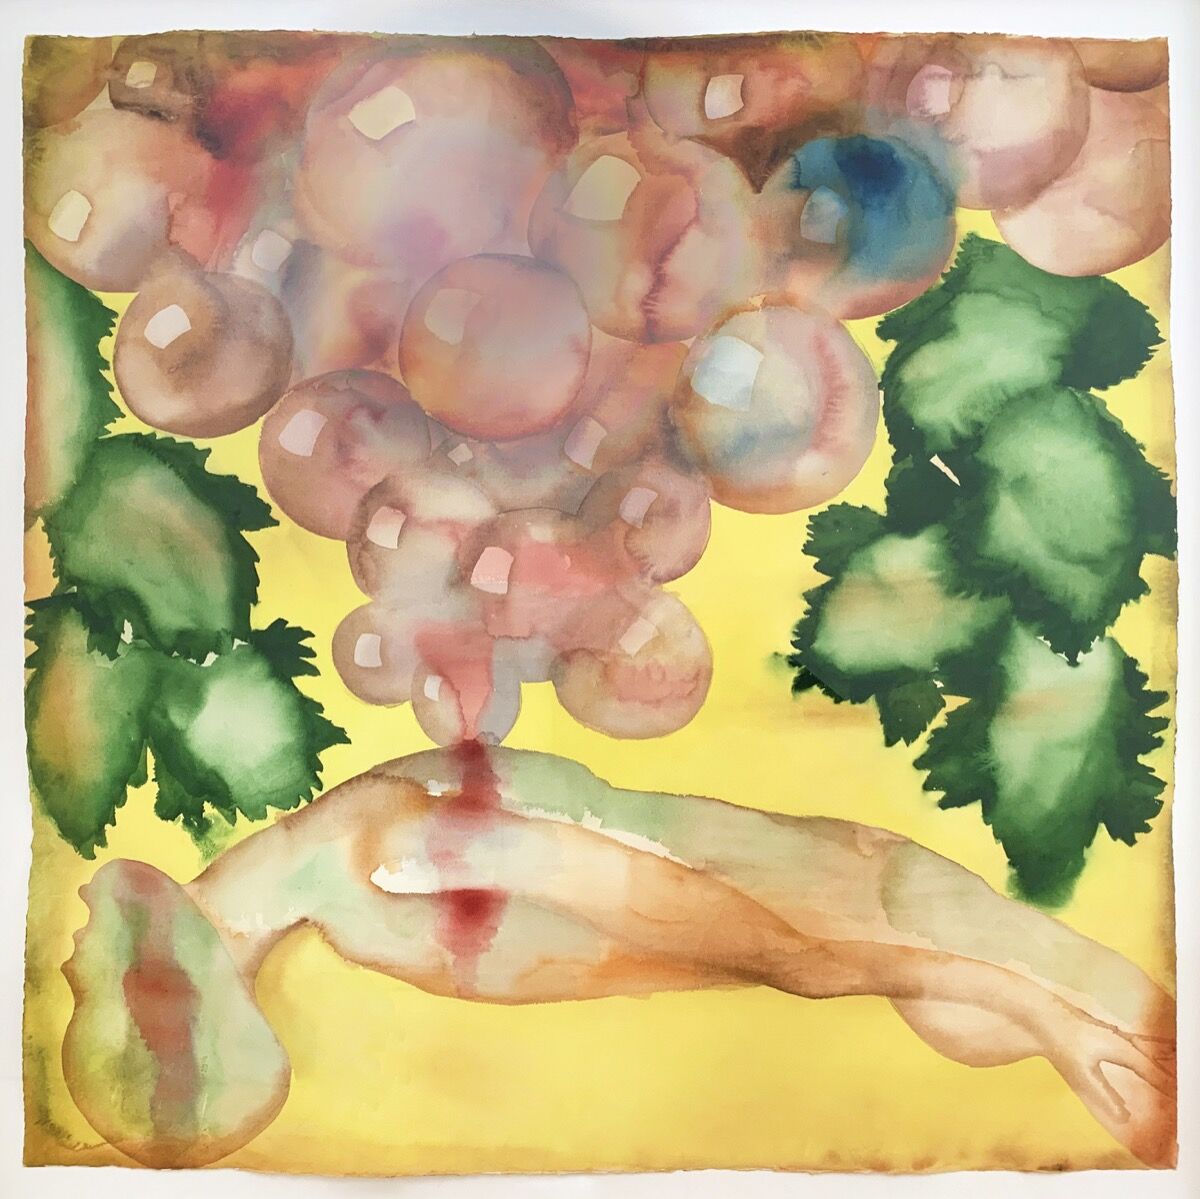 Francesco Clemente, Rapture, 2003. Courtesy of Eric Fischl, April Gornik, and the New York Academy of Art.